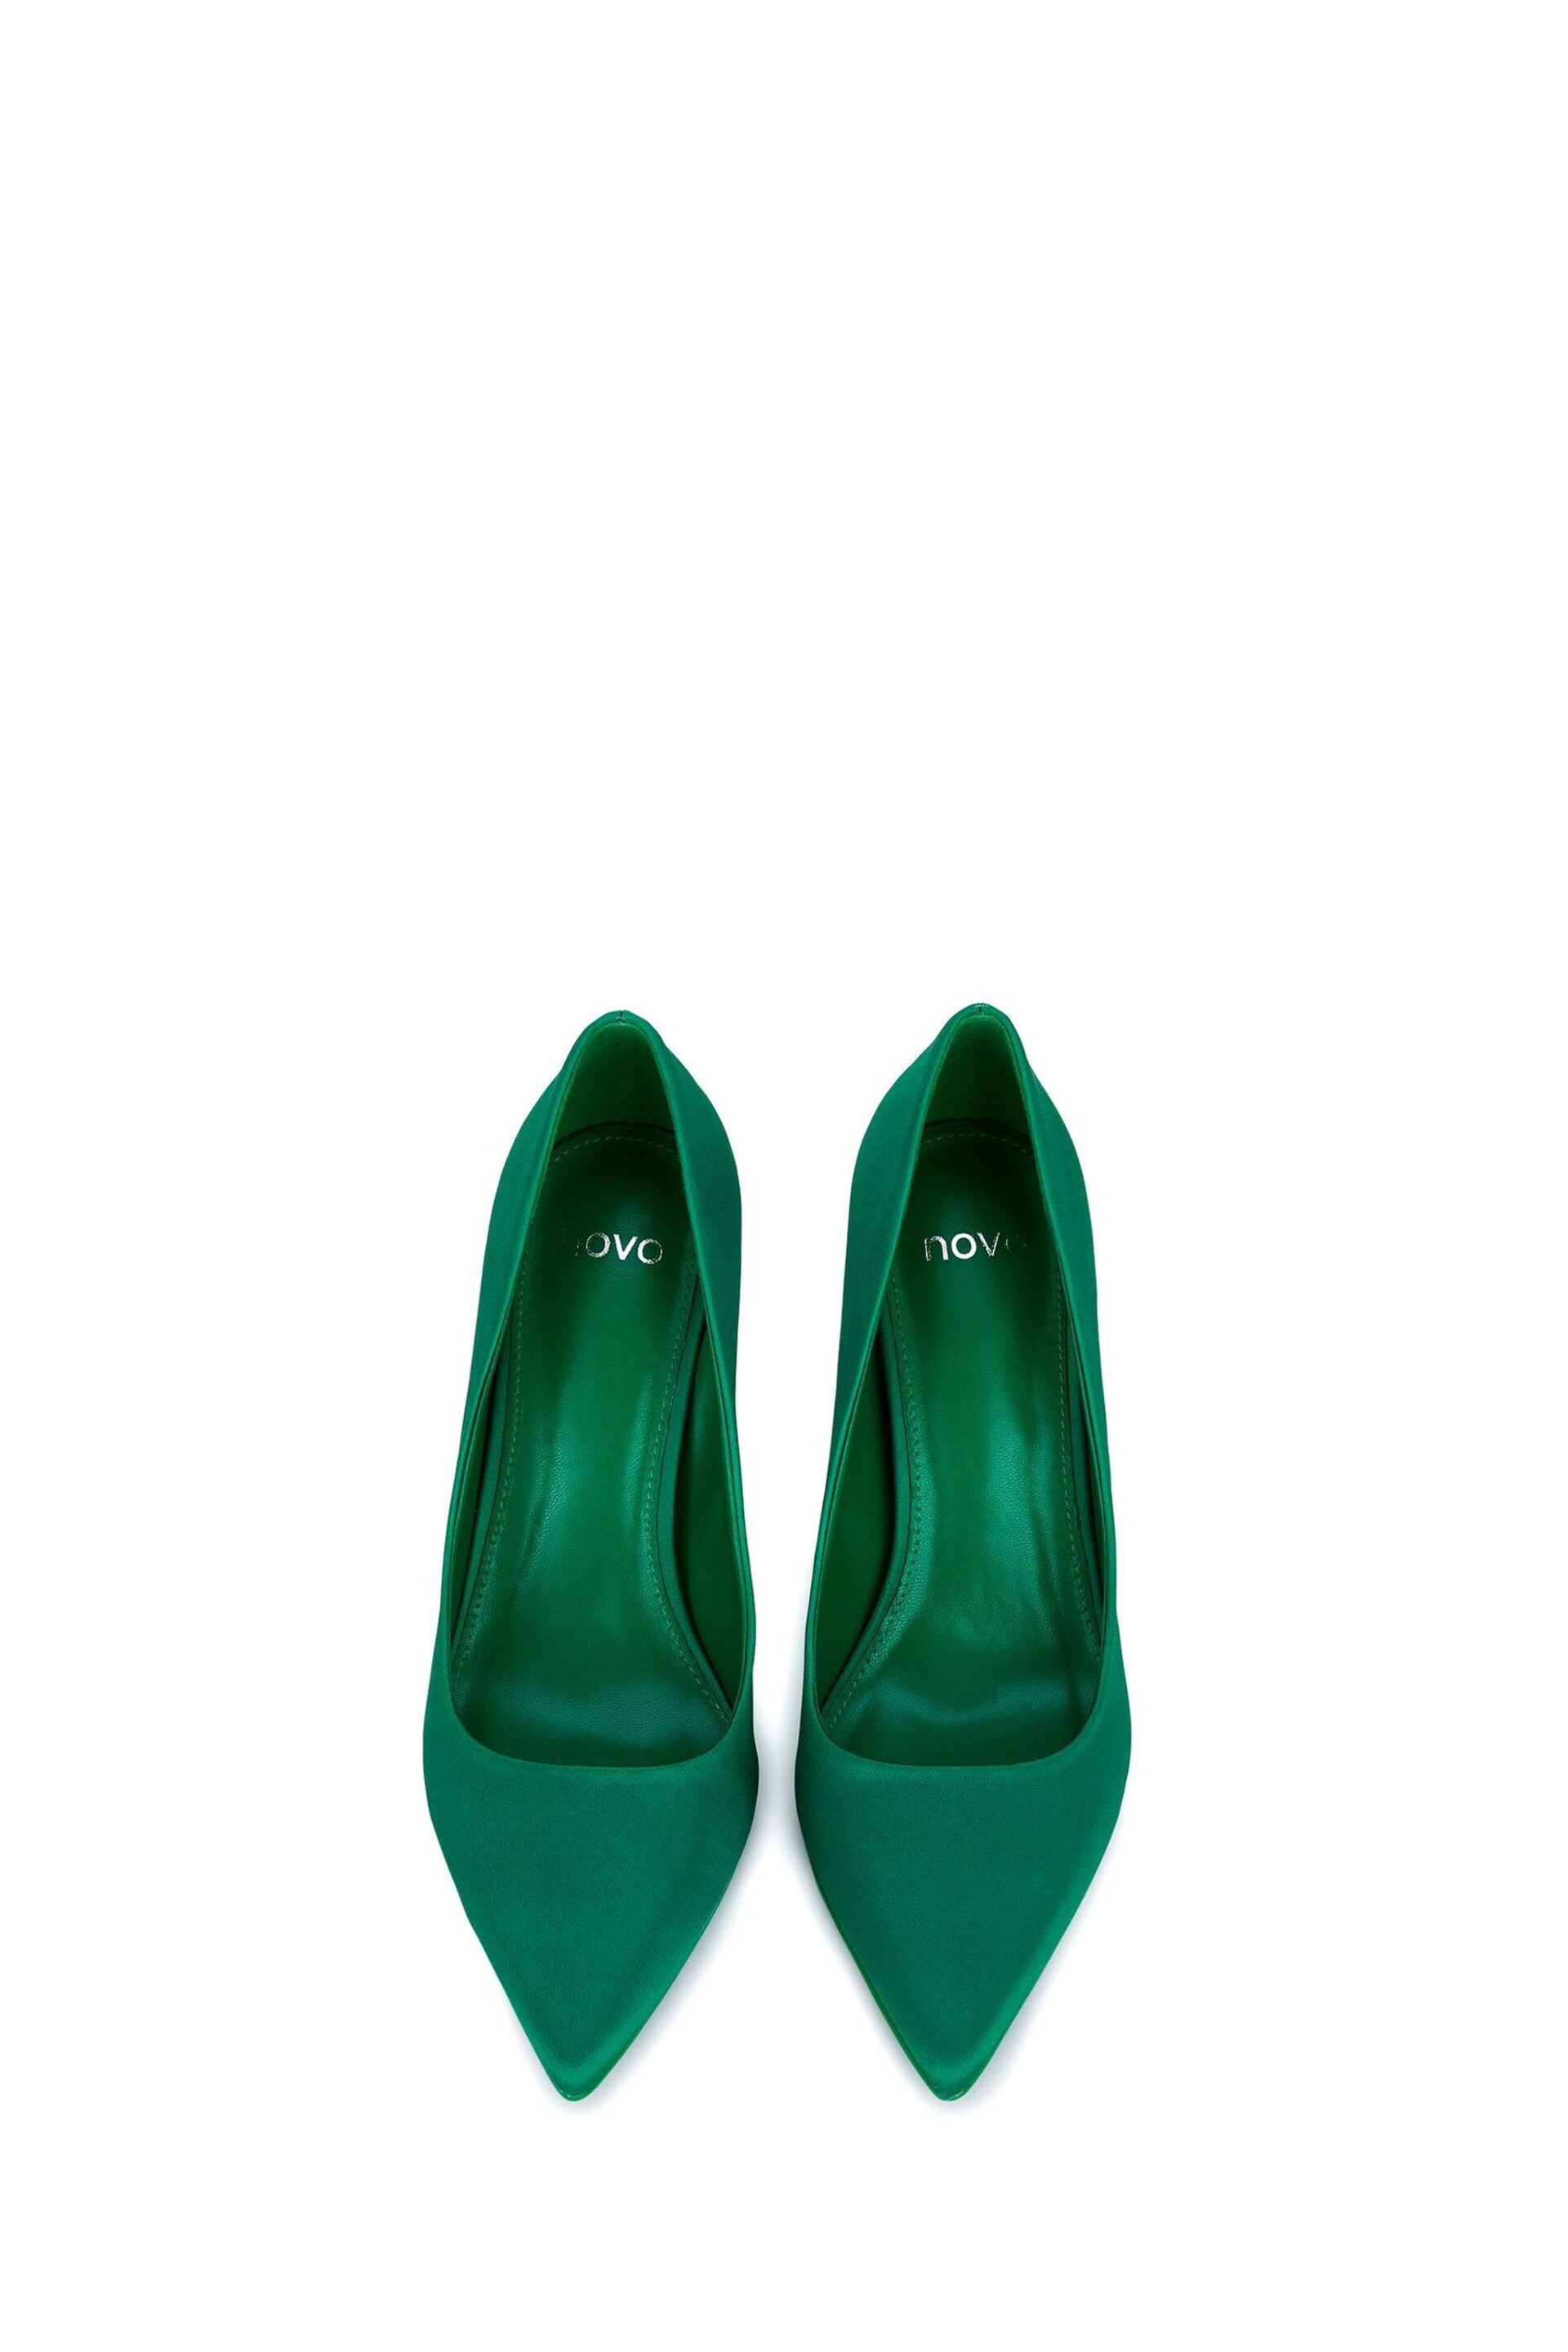 Novo Green Crissy Court Shoes - Image 4 of 5